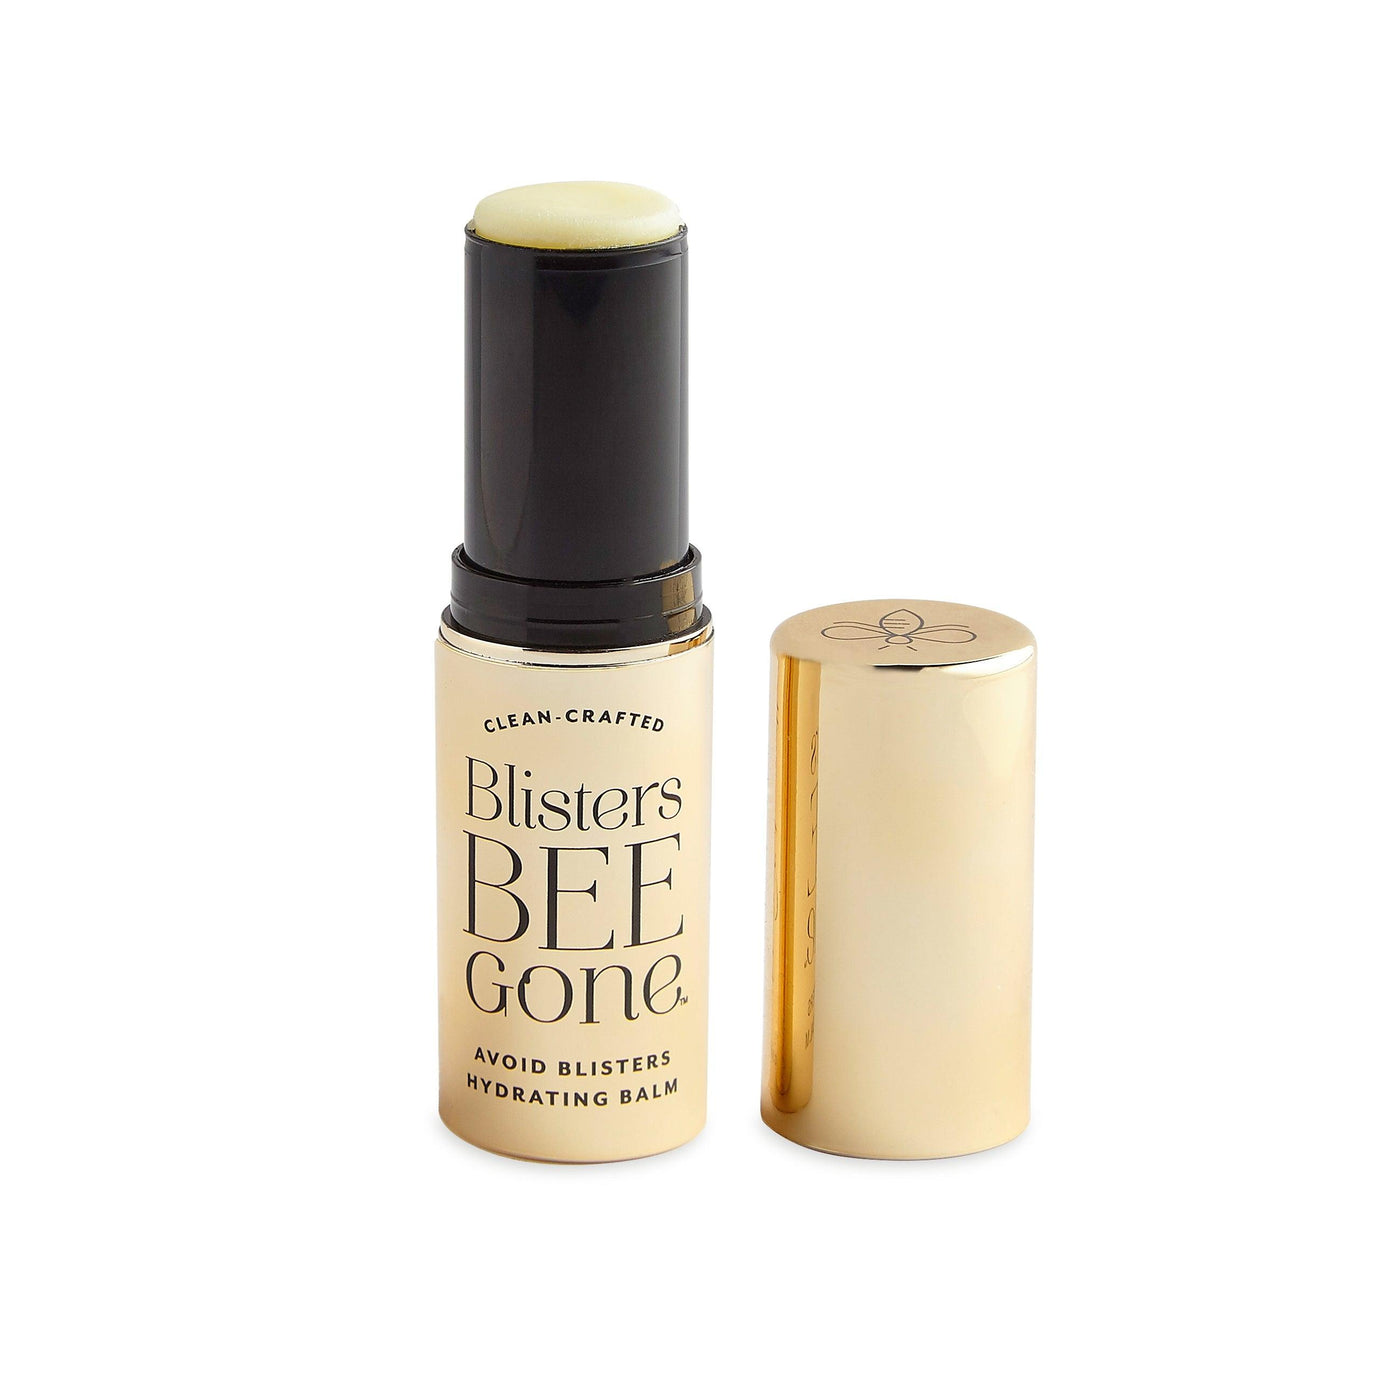 Blisters Bee Gone Hydrating Balm | Fruit of the Vine Boutique 